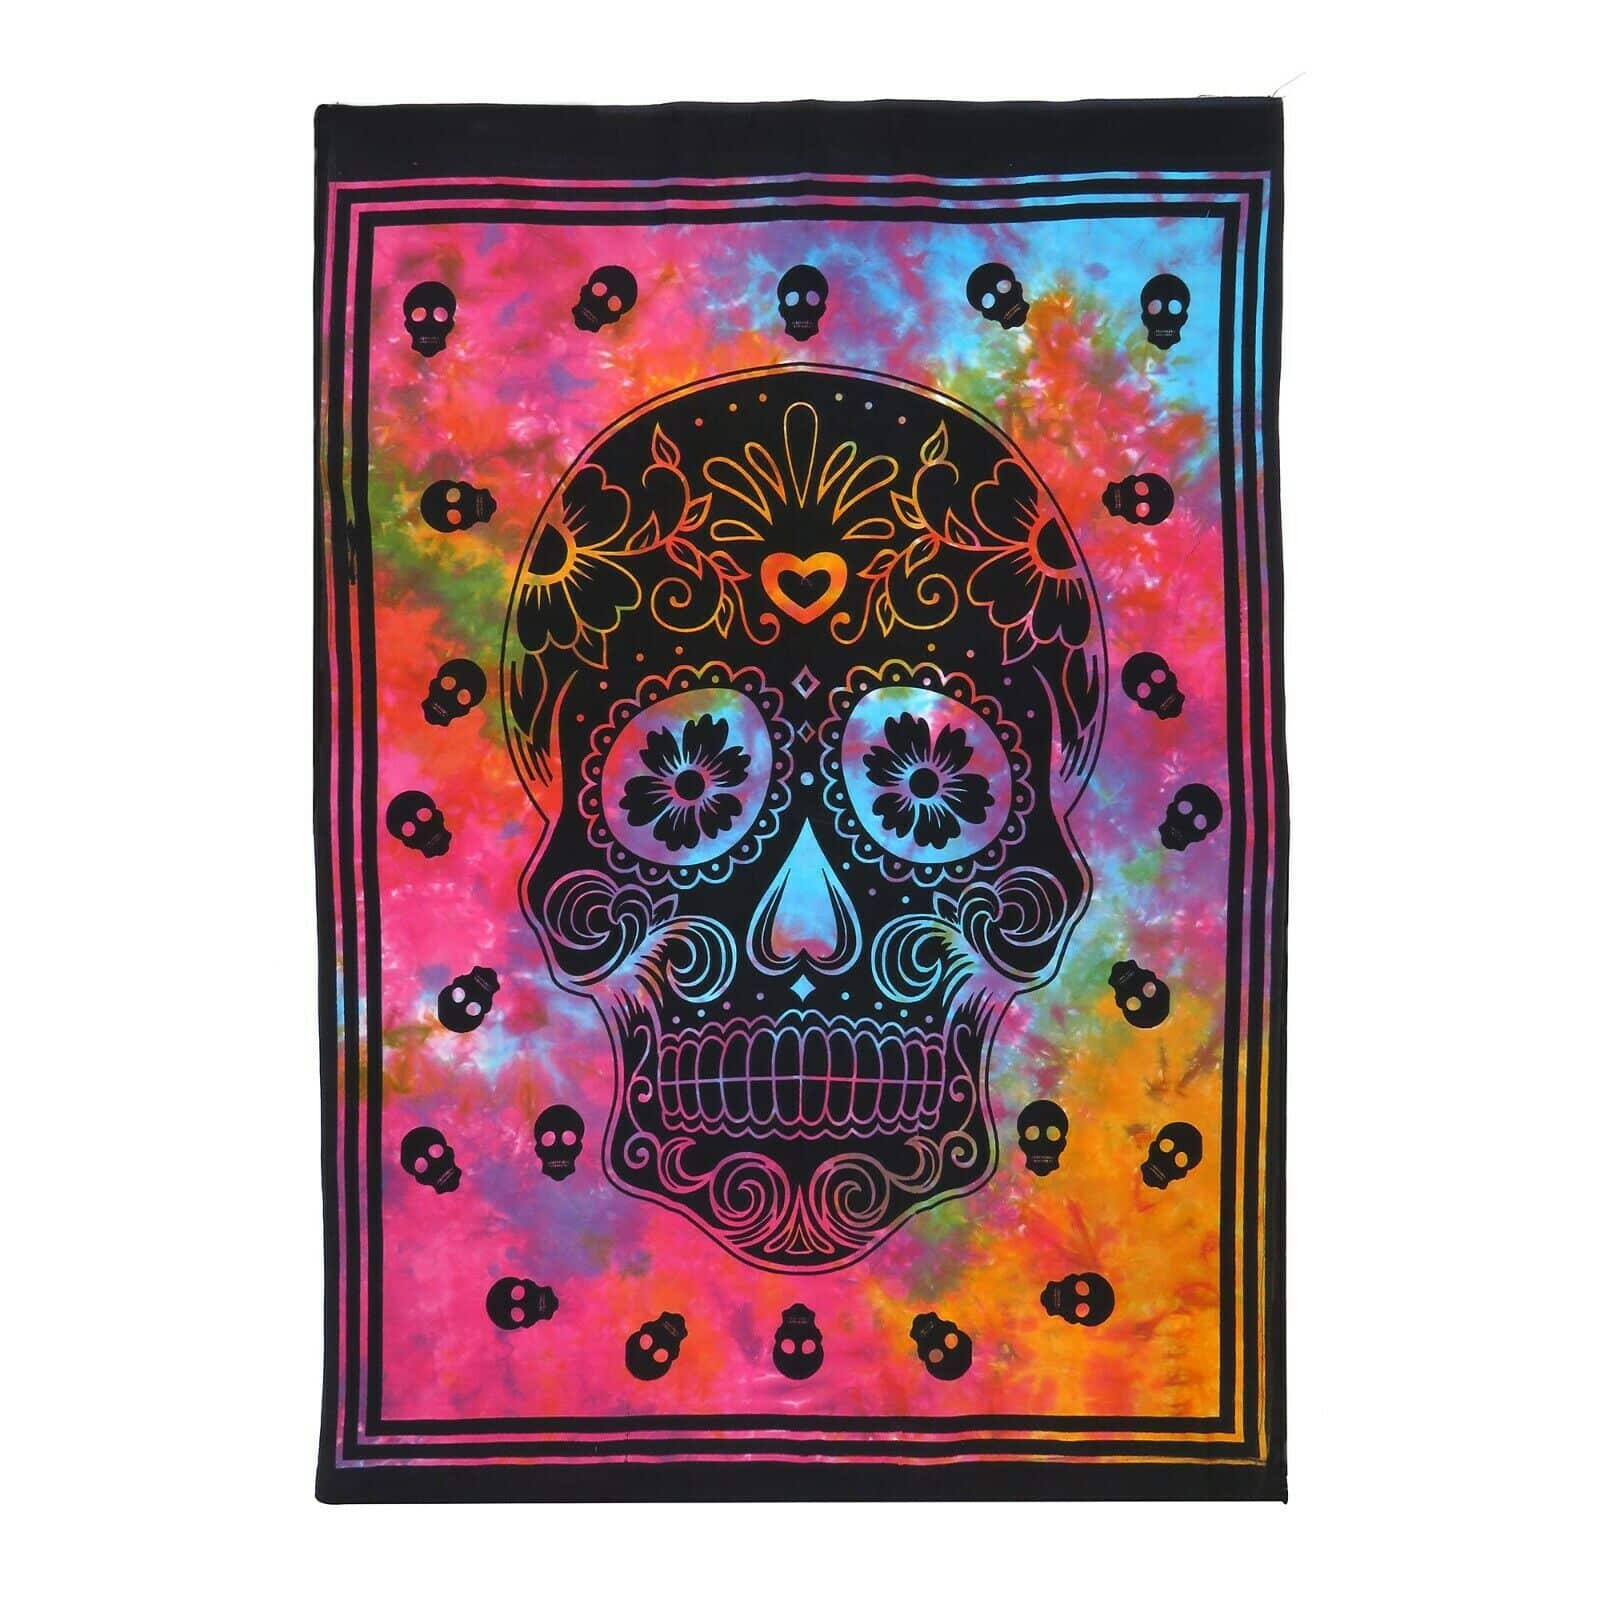 Indian Tie Dye Wall Hanging Tapestry Skull Print Cotton Poster Wall Art Decor